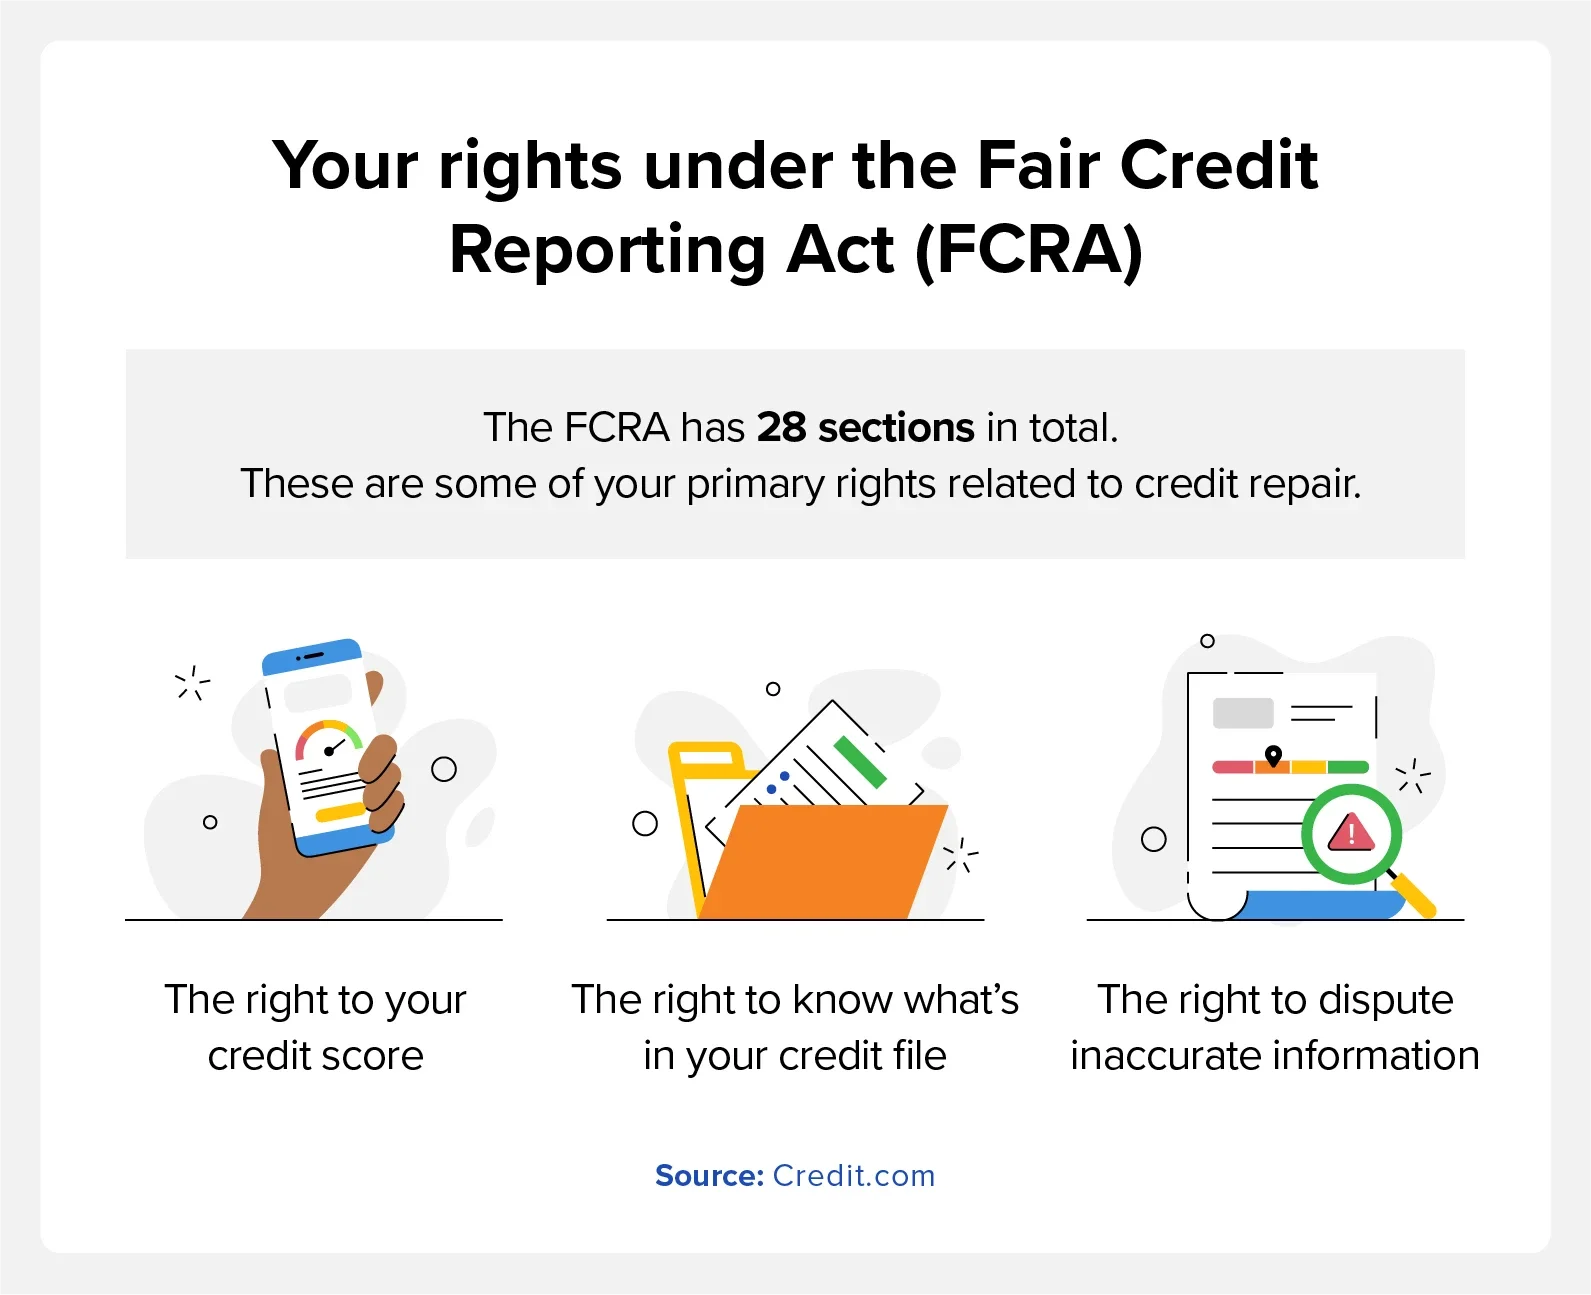 Graphic explaining your rights under the Fair Credit Reporting Act (FCRA)